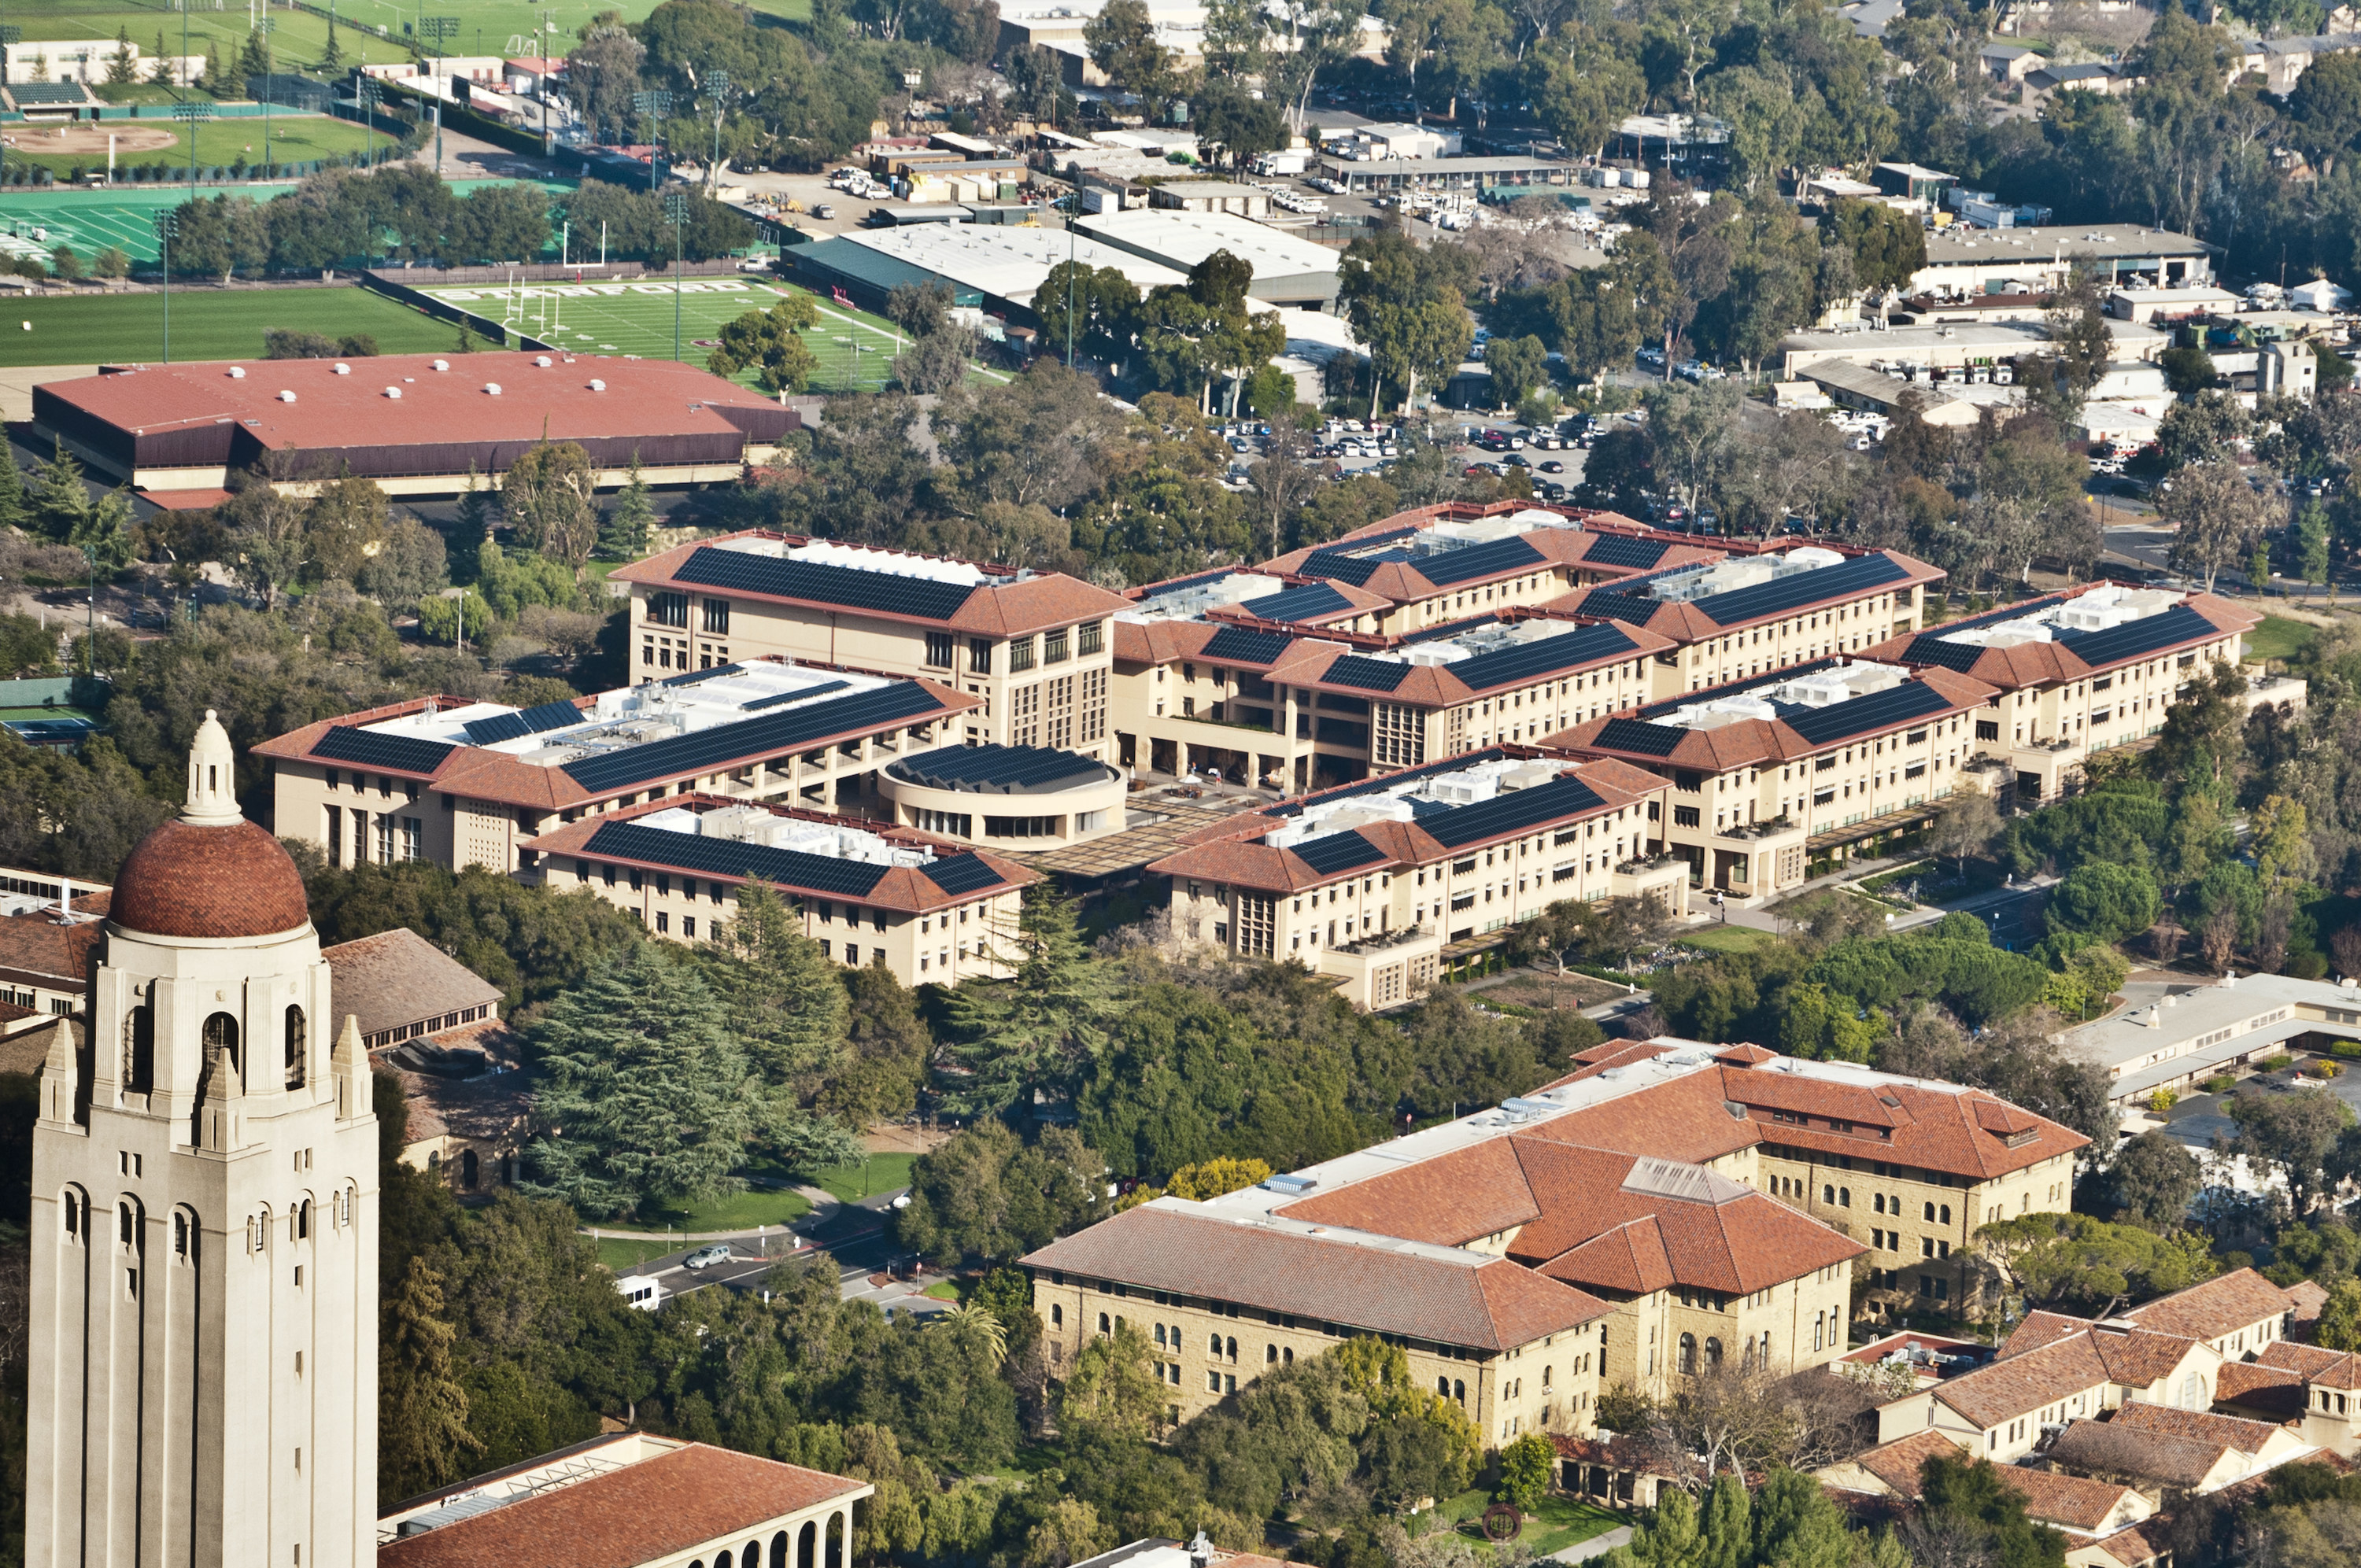 An overhead view of the Stanford campus